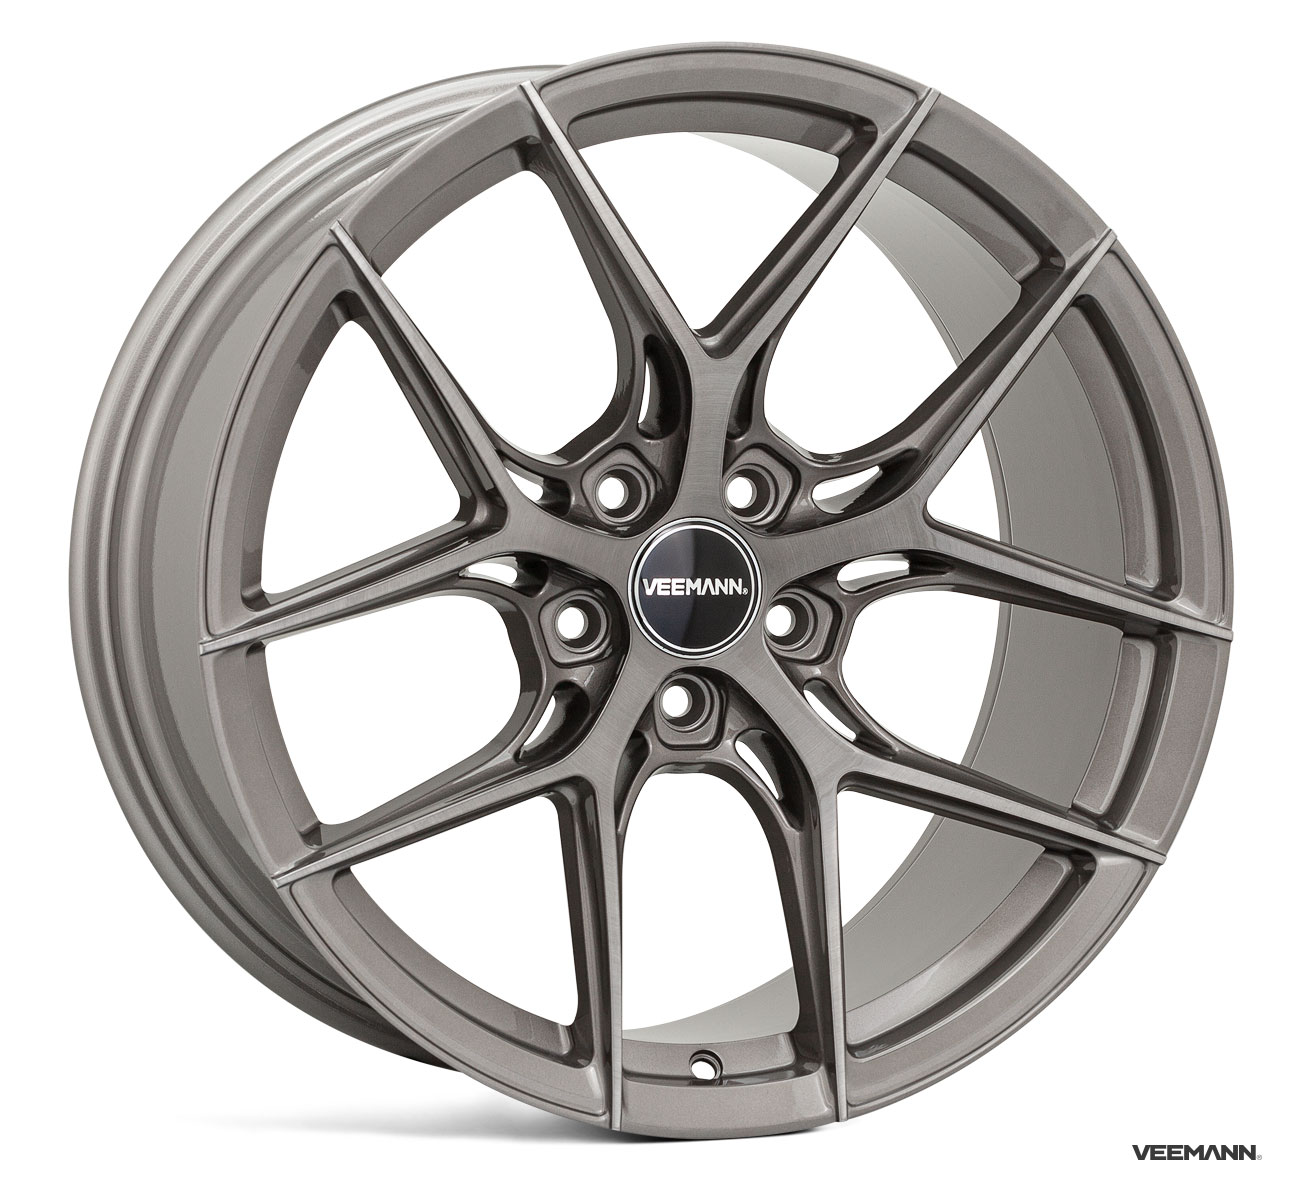 NEW 19" VEEMANN VC580R ALLOY WHEELS IN CARBON MACHINED WITH WIDER 9.5" REARS